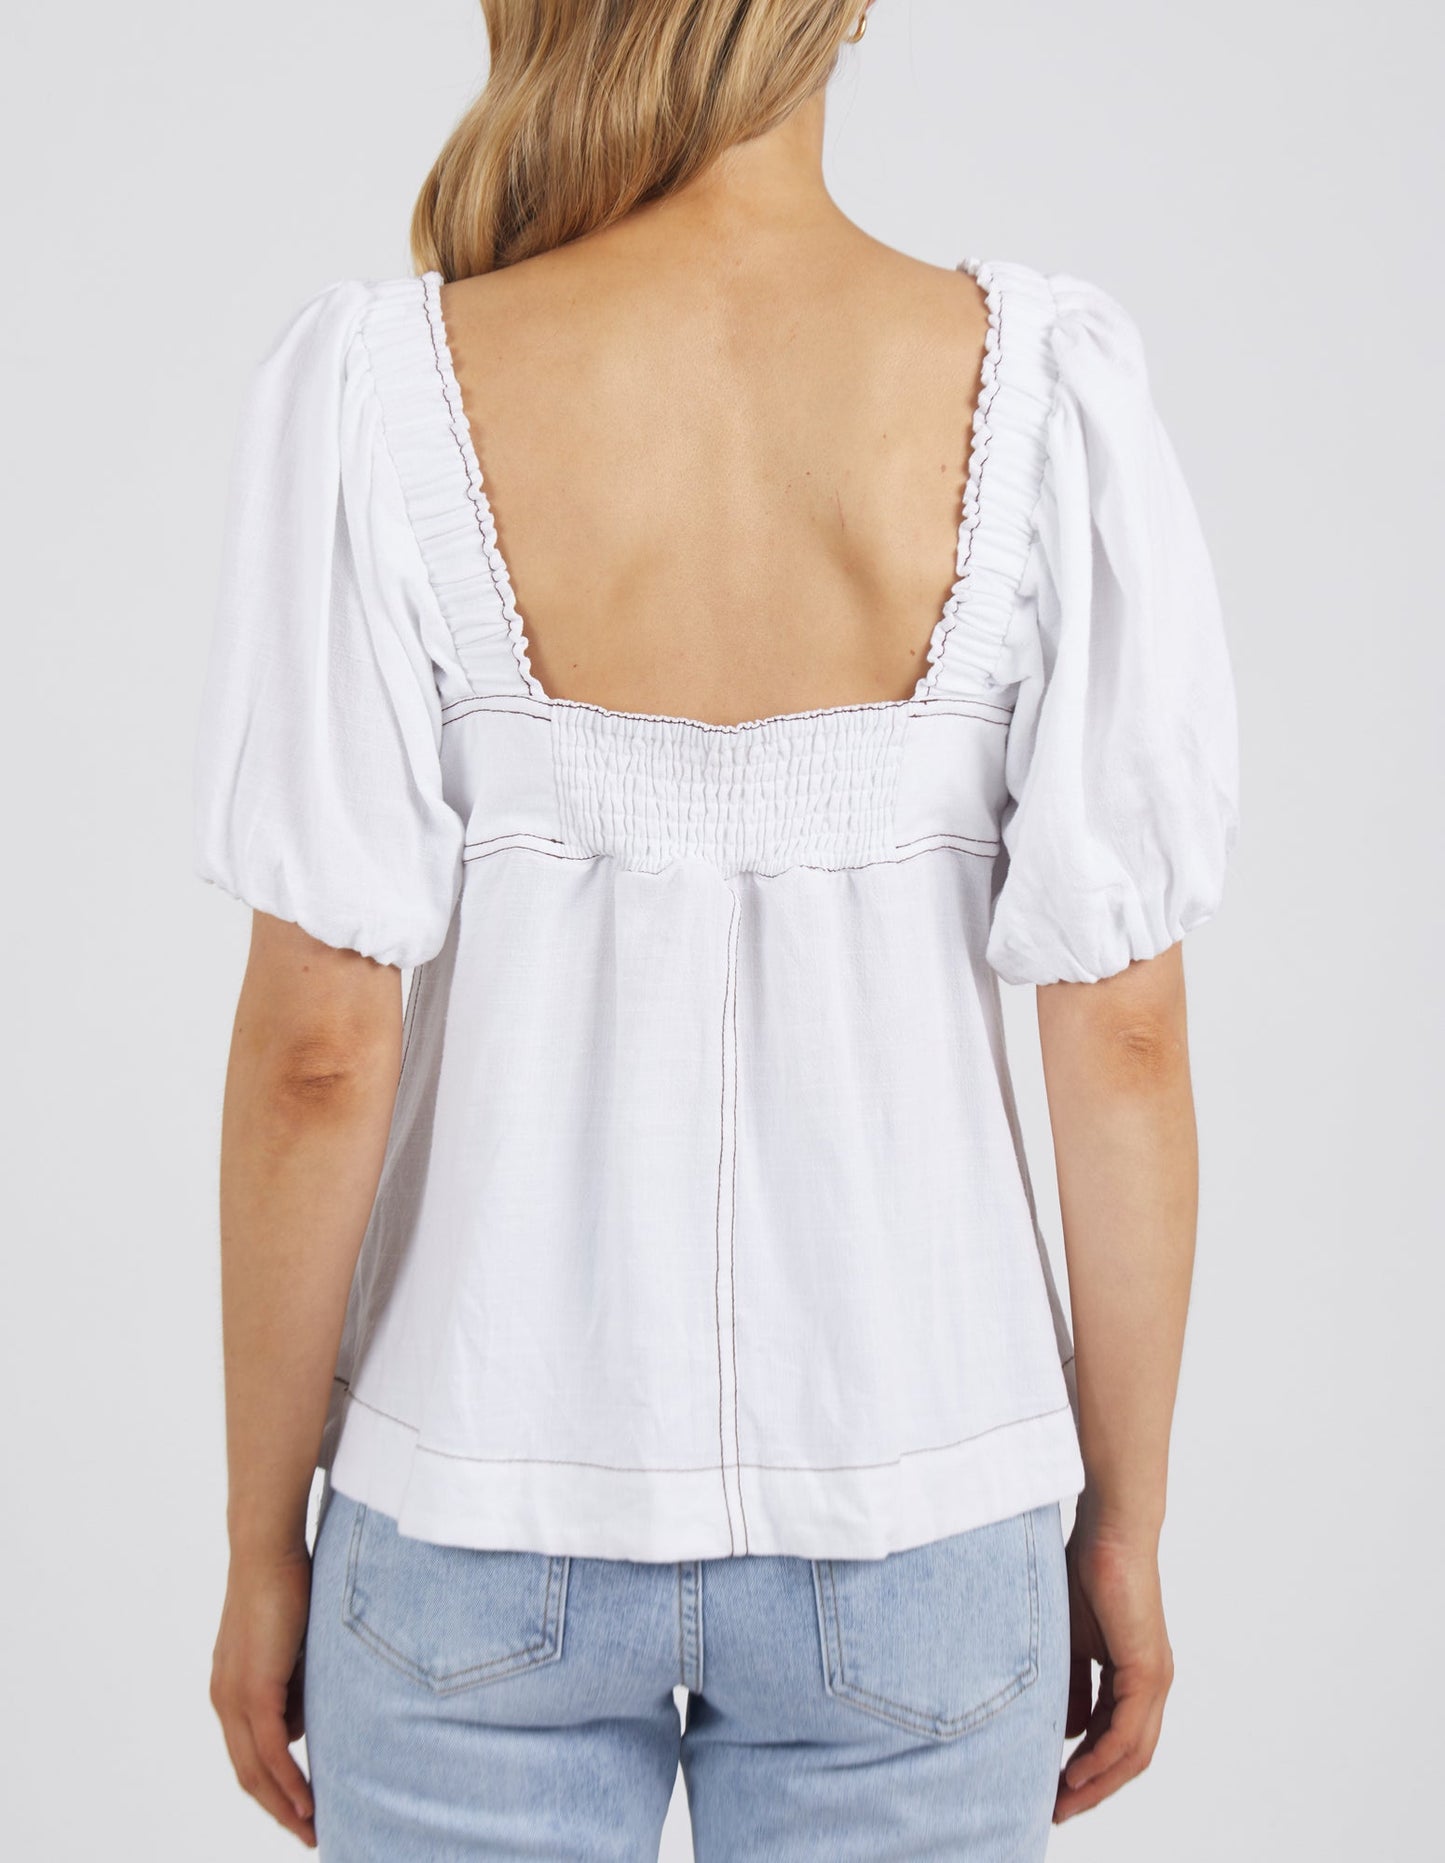 FOXWOOD FLORENCE TOP - WHITE